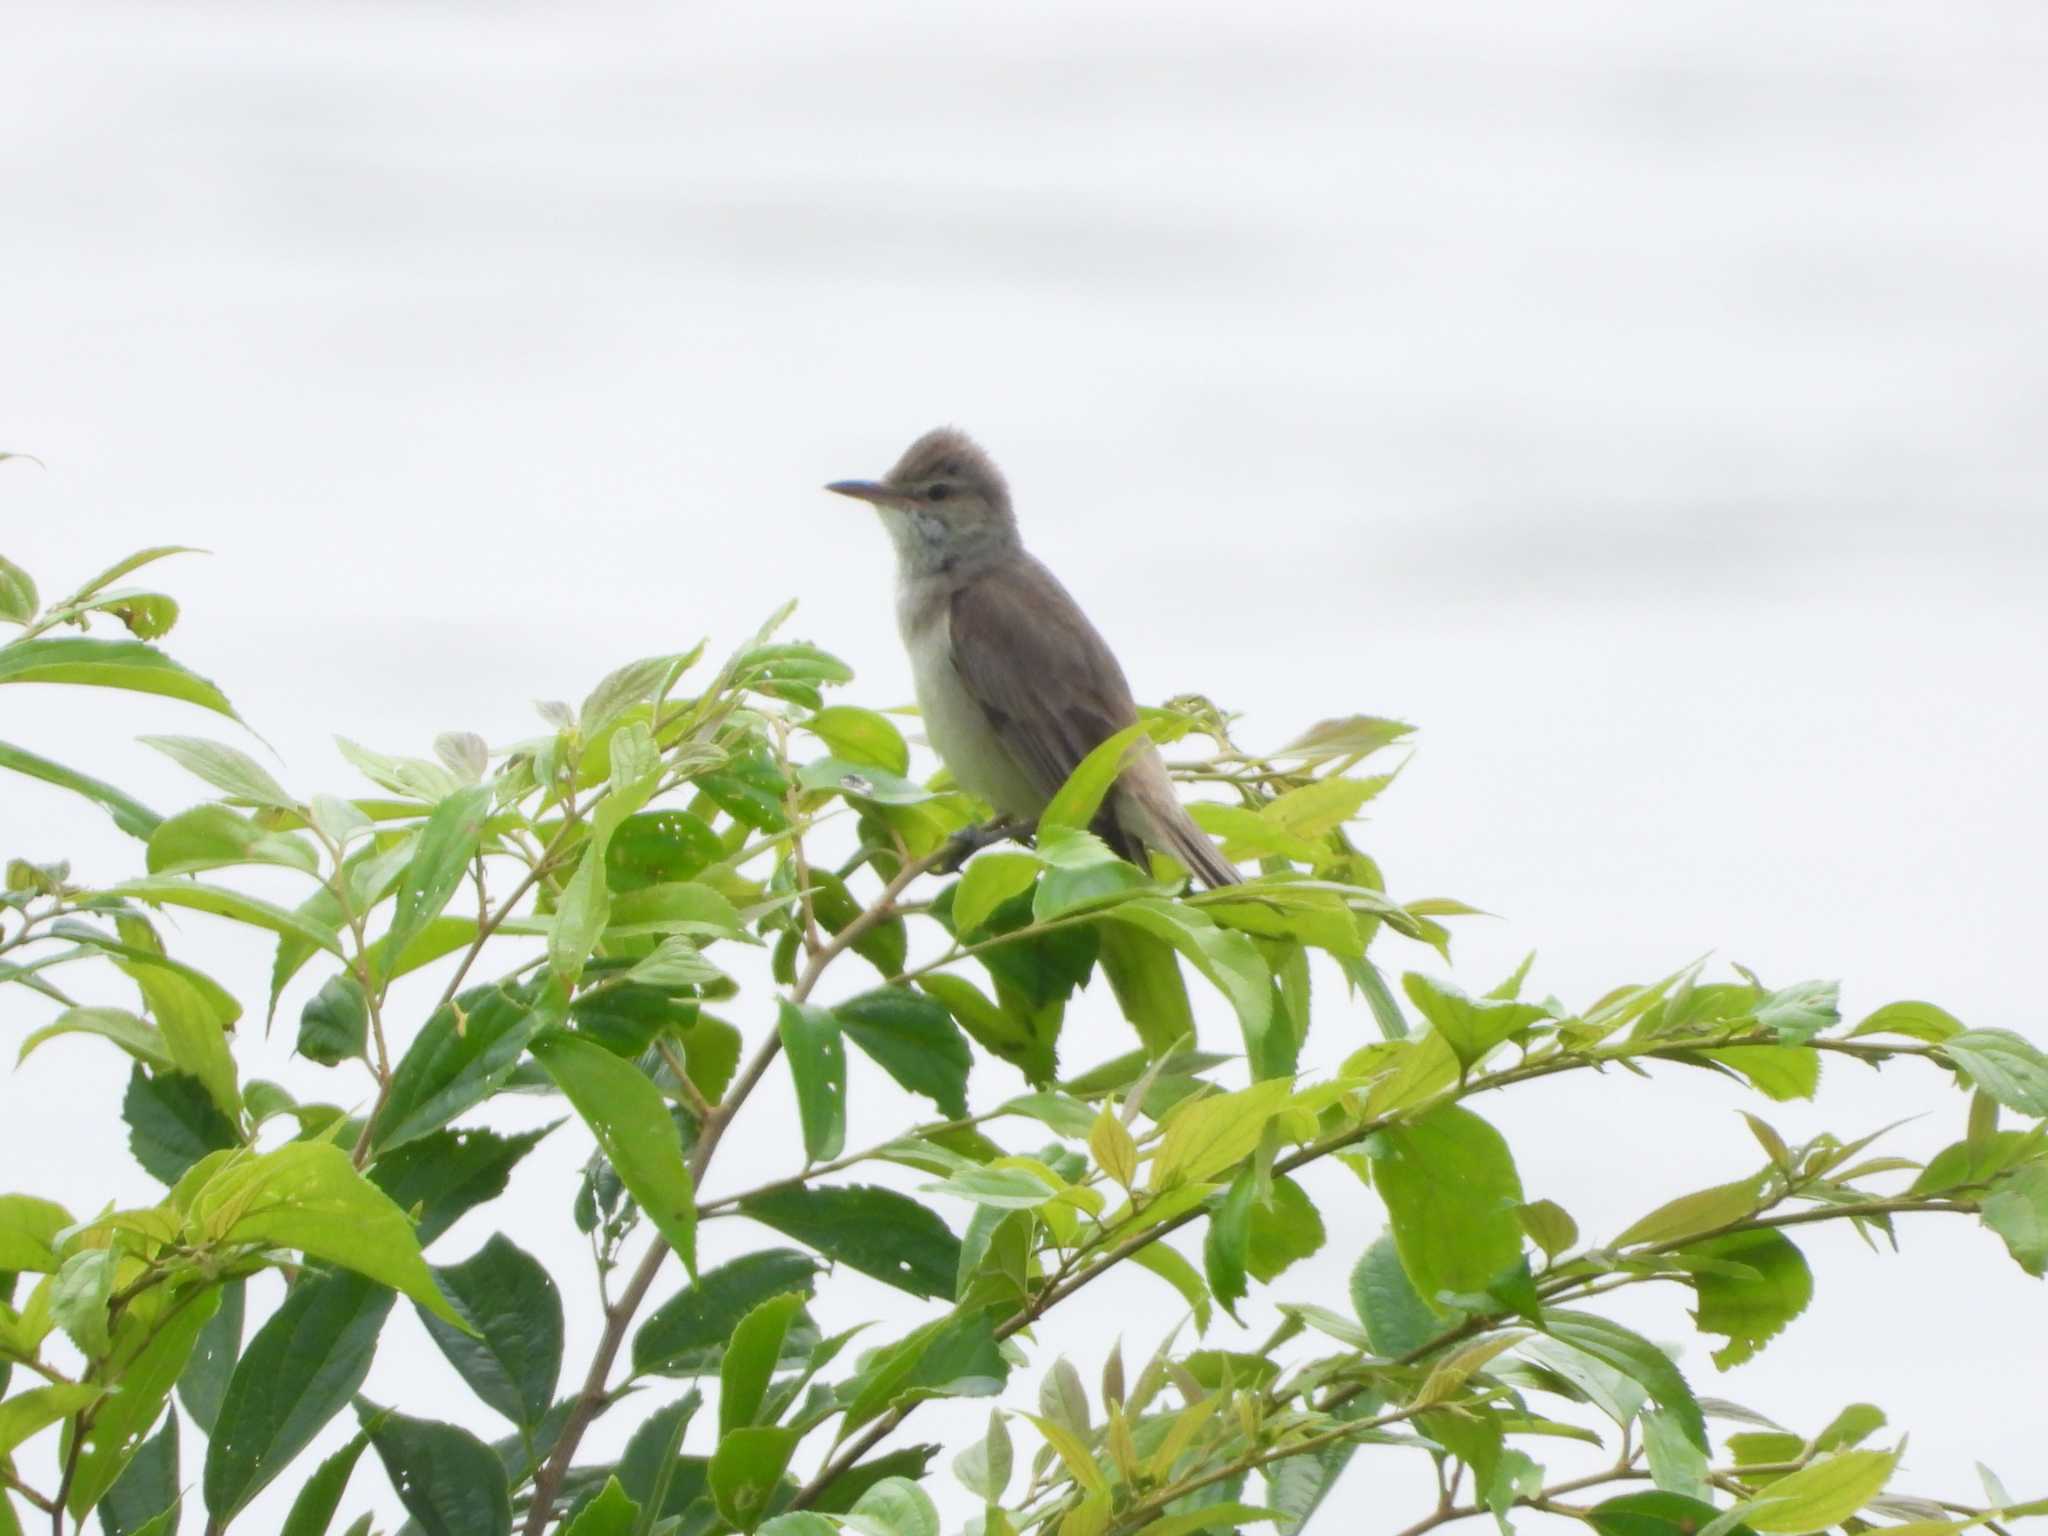 Photo of Oriental Reed Warbler at 流山 by サジタリウスの眼